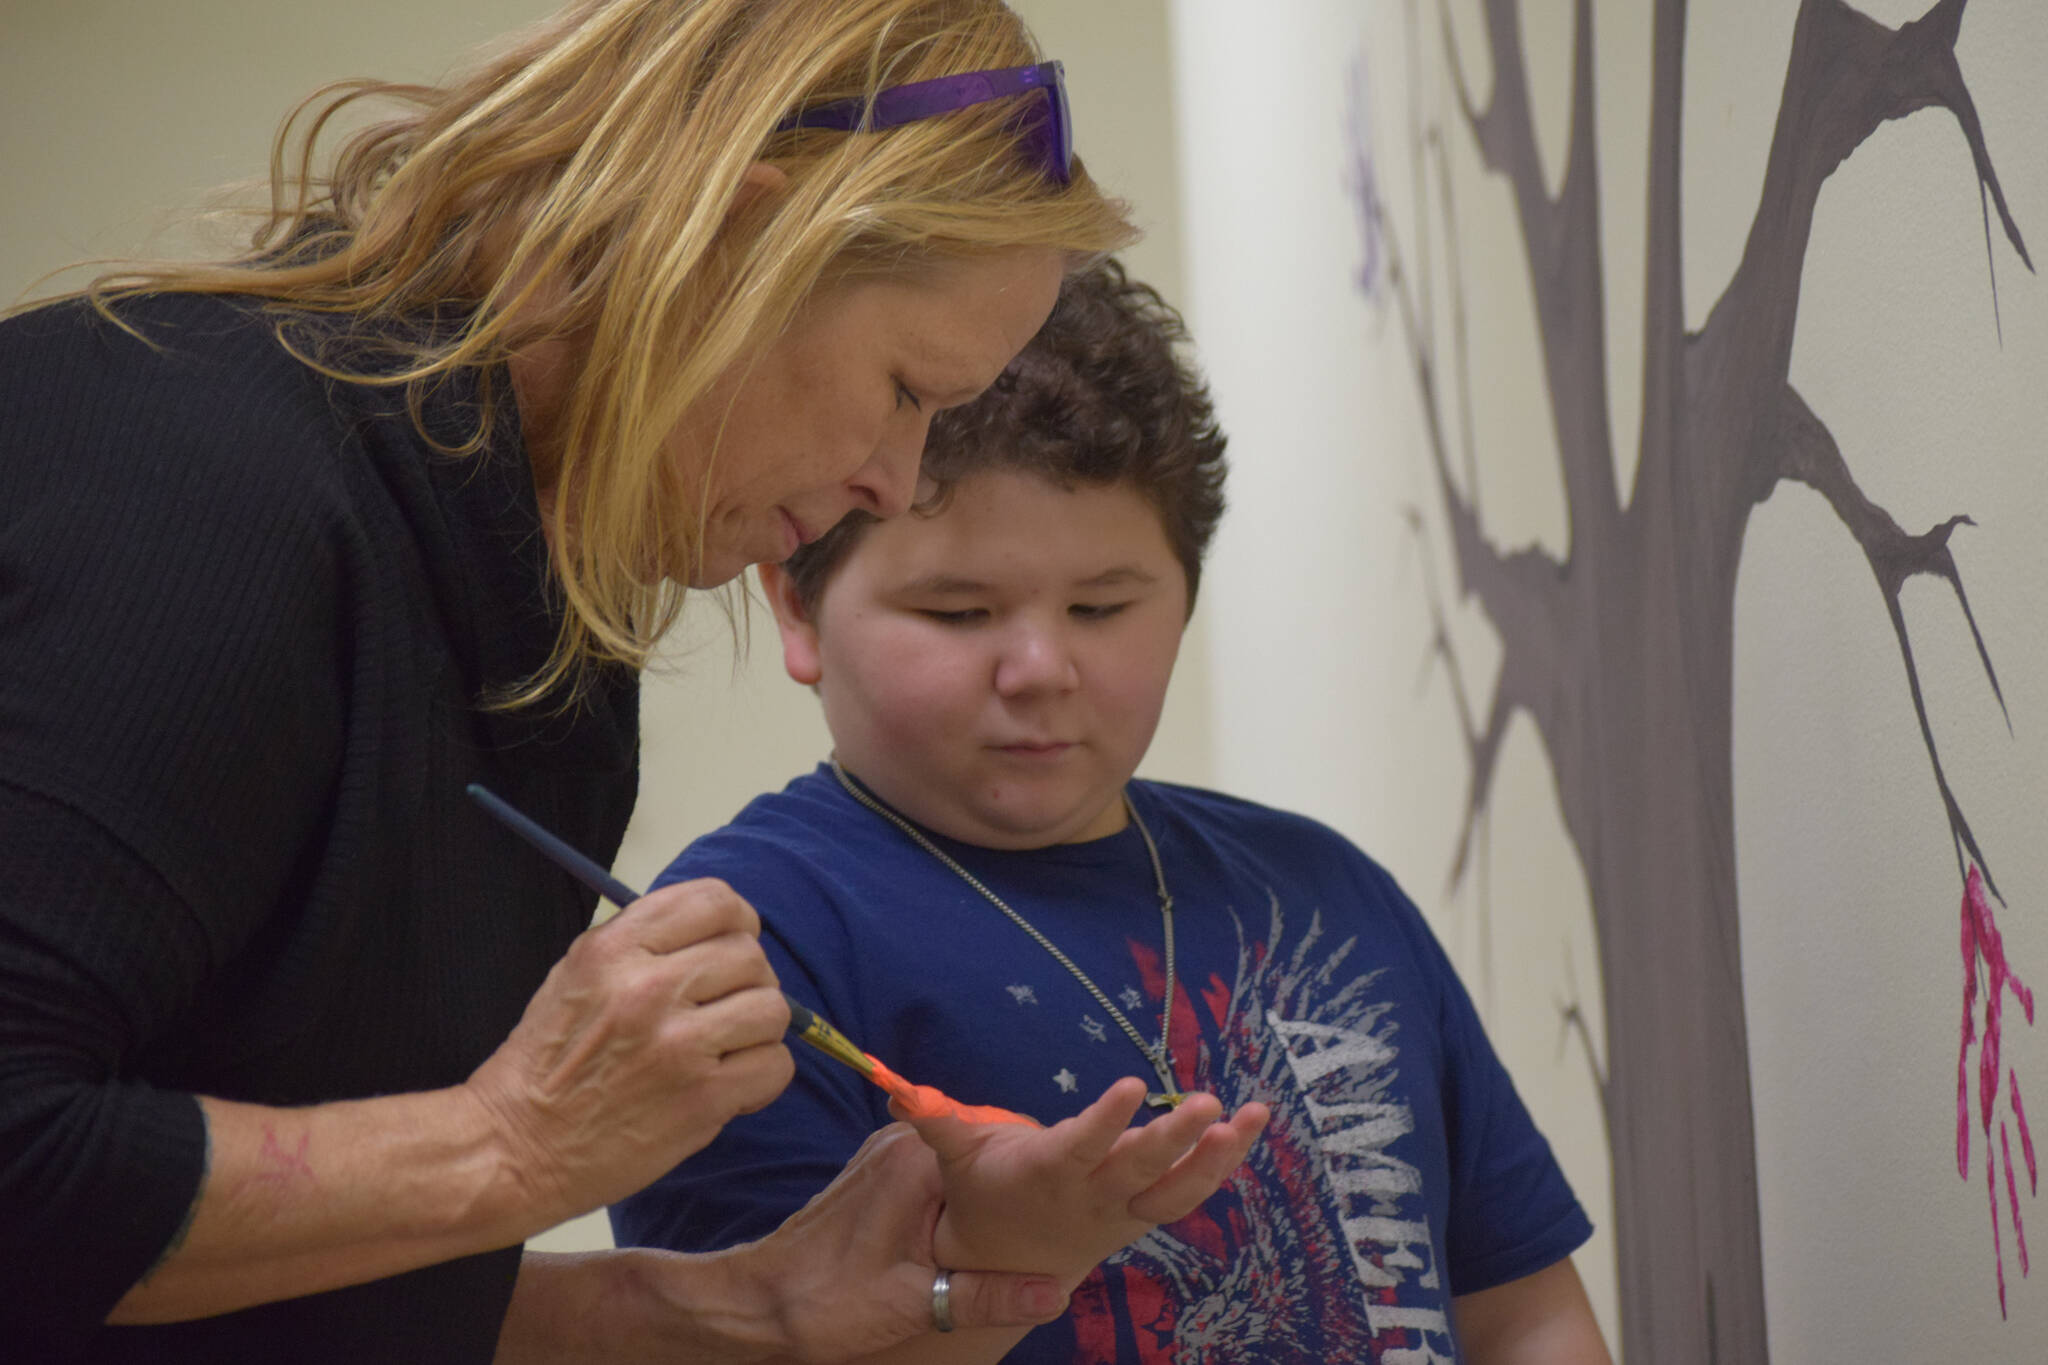 Carolyn Massey paints 10-year-old Kenny Smith’s hand to add to the helping hands tree at the Children’s Advocacy Center on Tuesday, Nov. 16, 2021, in Kenai, Alaska. (Camille Botello/Peninsula Clarion)